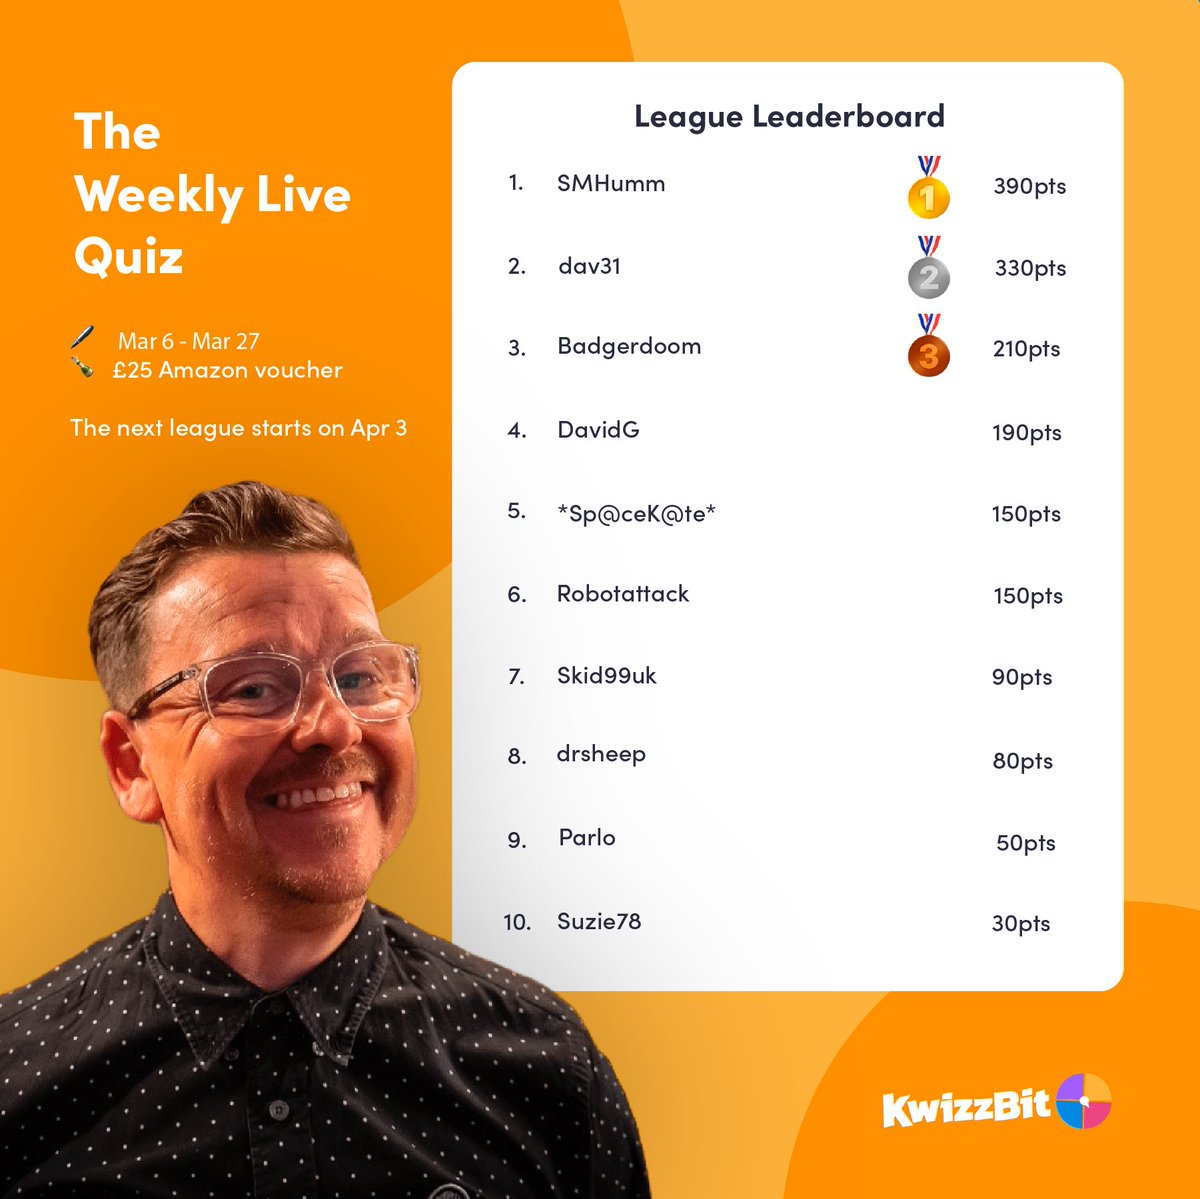 Congratulations SMHumm - you absolutely smashed our quiz league in March. That £25 Amazon voucher is coming your way! 👏🏼👏🏼👏🏼 April's league is already underway and the competition looks fierce. See you on Wednesday for the next instalment of The Weekly Live Quiz! 🔥📅 #KwizzBit